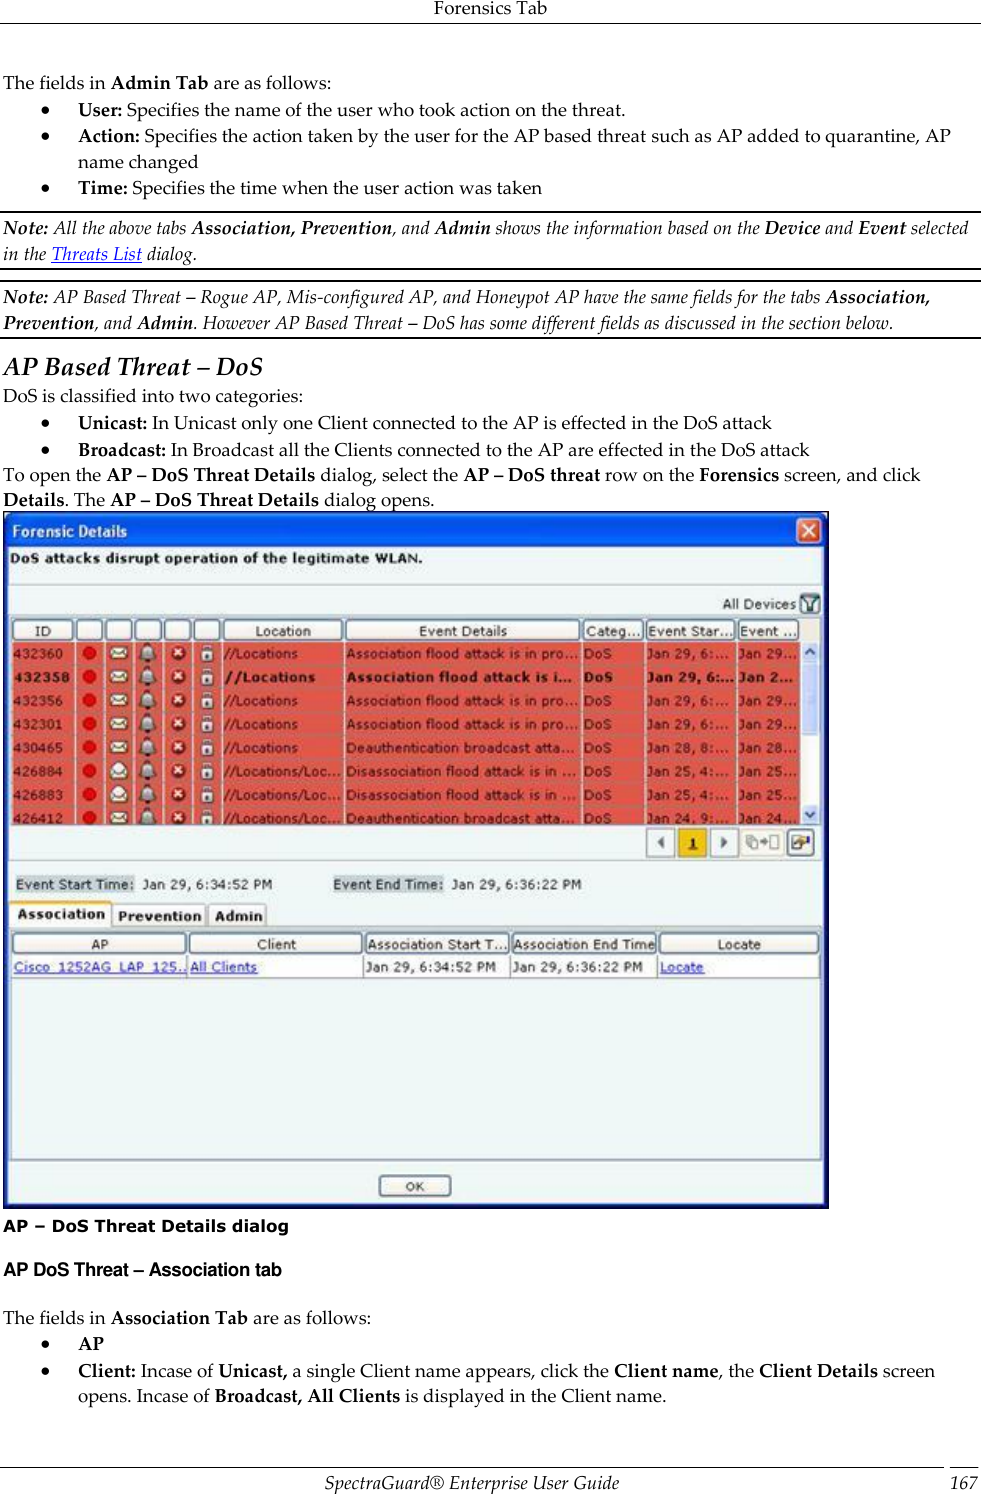 Forensics Tab SpectraGuard®  Enterprise User Guide 167 The fields in Admin Tab are as follows:  User: Specifies the name of the user who took action on the threat.  Action: Specifies the action taken by the user for the AP based threat such as AP added to quarantine, AP name changed  Time: Specifies the time when the user action was taken Note: All the above tabs Association, Prevention, and Admin shows the information based on the Device and Event selected in the Threats List dialog. Note: AP Based Threat – Rogue AP, Mis-configured AP, and Honeypot AP have the same fields for the tabs Association, Prevention, and Admin. However AP Based Threat – DoS has some different fields as discussed in the section below. AP Based Threat – DoS DoS is classified into two categories:  Unicast: In Unicast only one Client connected to the AP is effected in the DoS attack  Broadcast: In Broadcast all the Clients connected to the AP are effected in the DoS attack To open the AP – DoS Threat Details dialog, select the AP – DoS threat row on the Forensics screen, and click Details. The AP – DoS Threat Details dialog opens.  AP – DoS Threat Details dialog AP DoS Threat – Association tab The fields in Association Tab are as follows:  AP  Client: Incase of Unicast, a single Client name appears, click the Client name, the Client Details screen opens. Incase of Broadcast, All Clients is displayed in the Client name. 